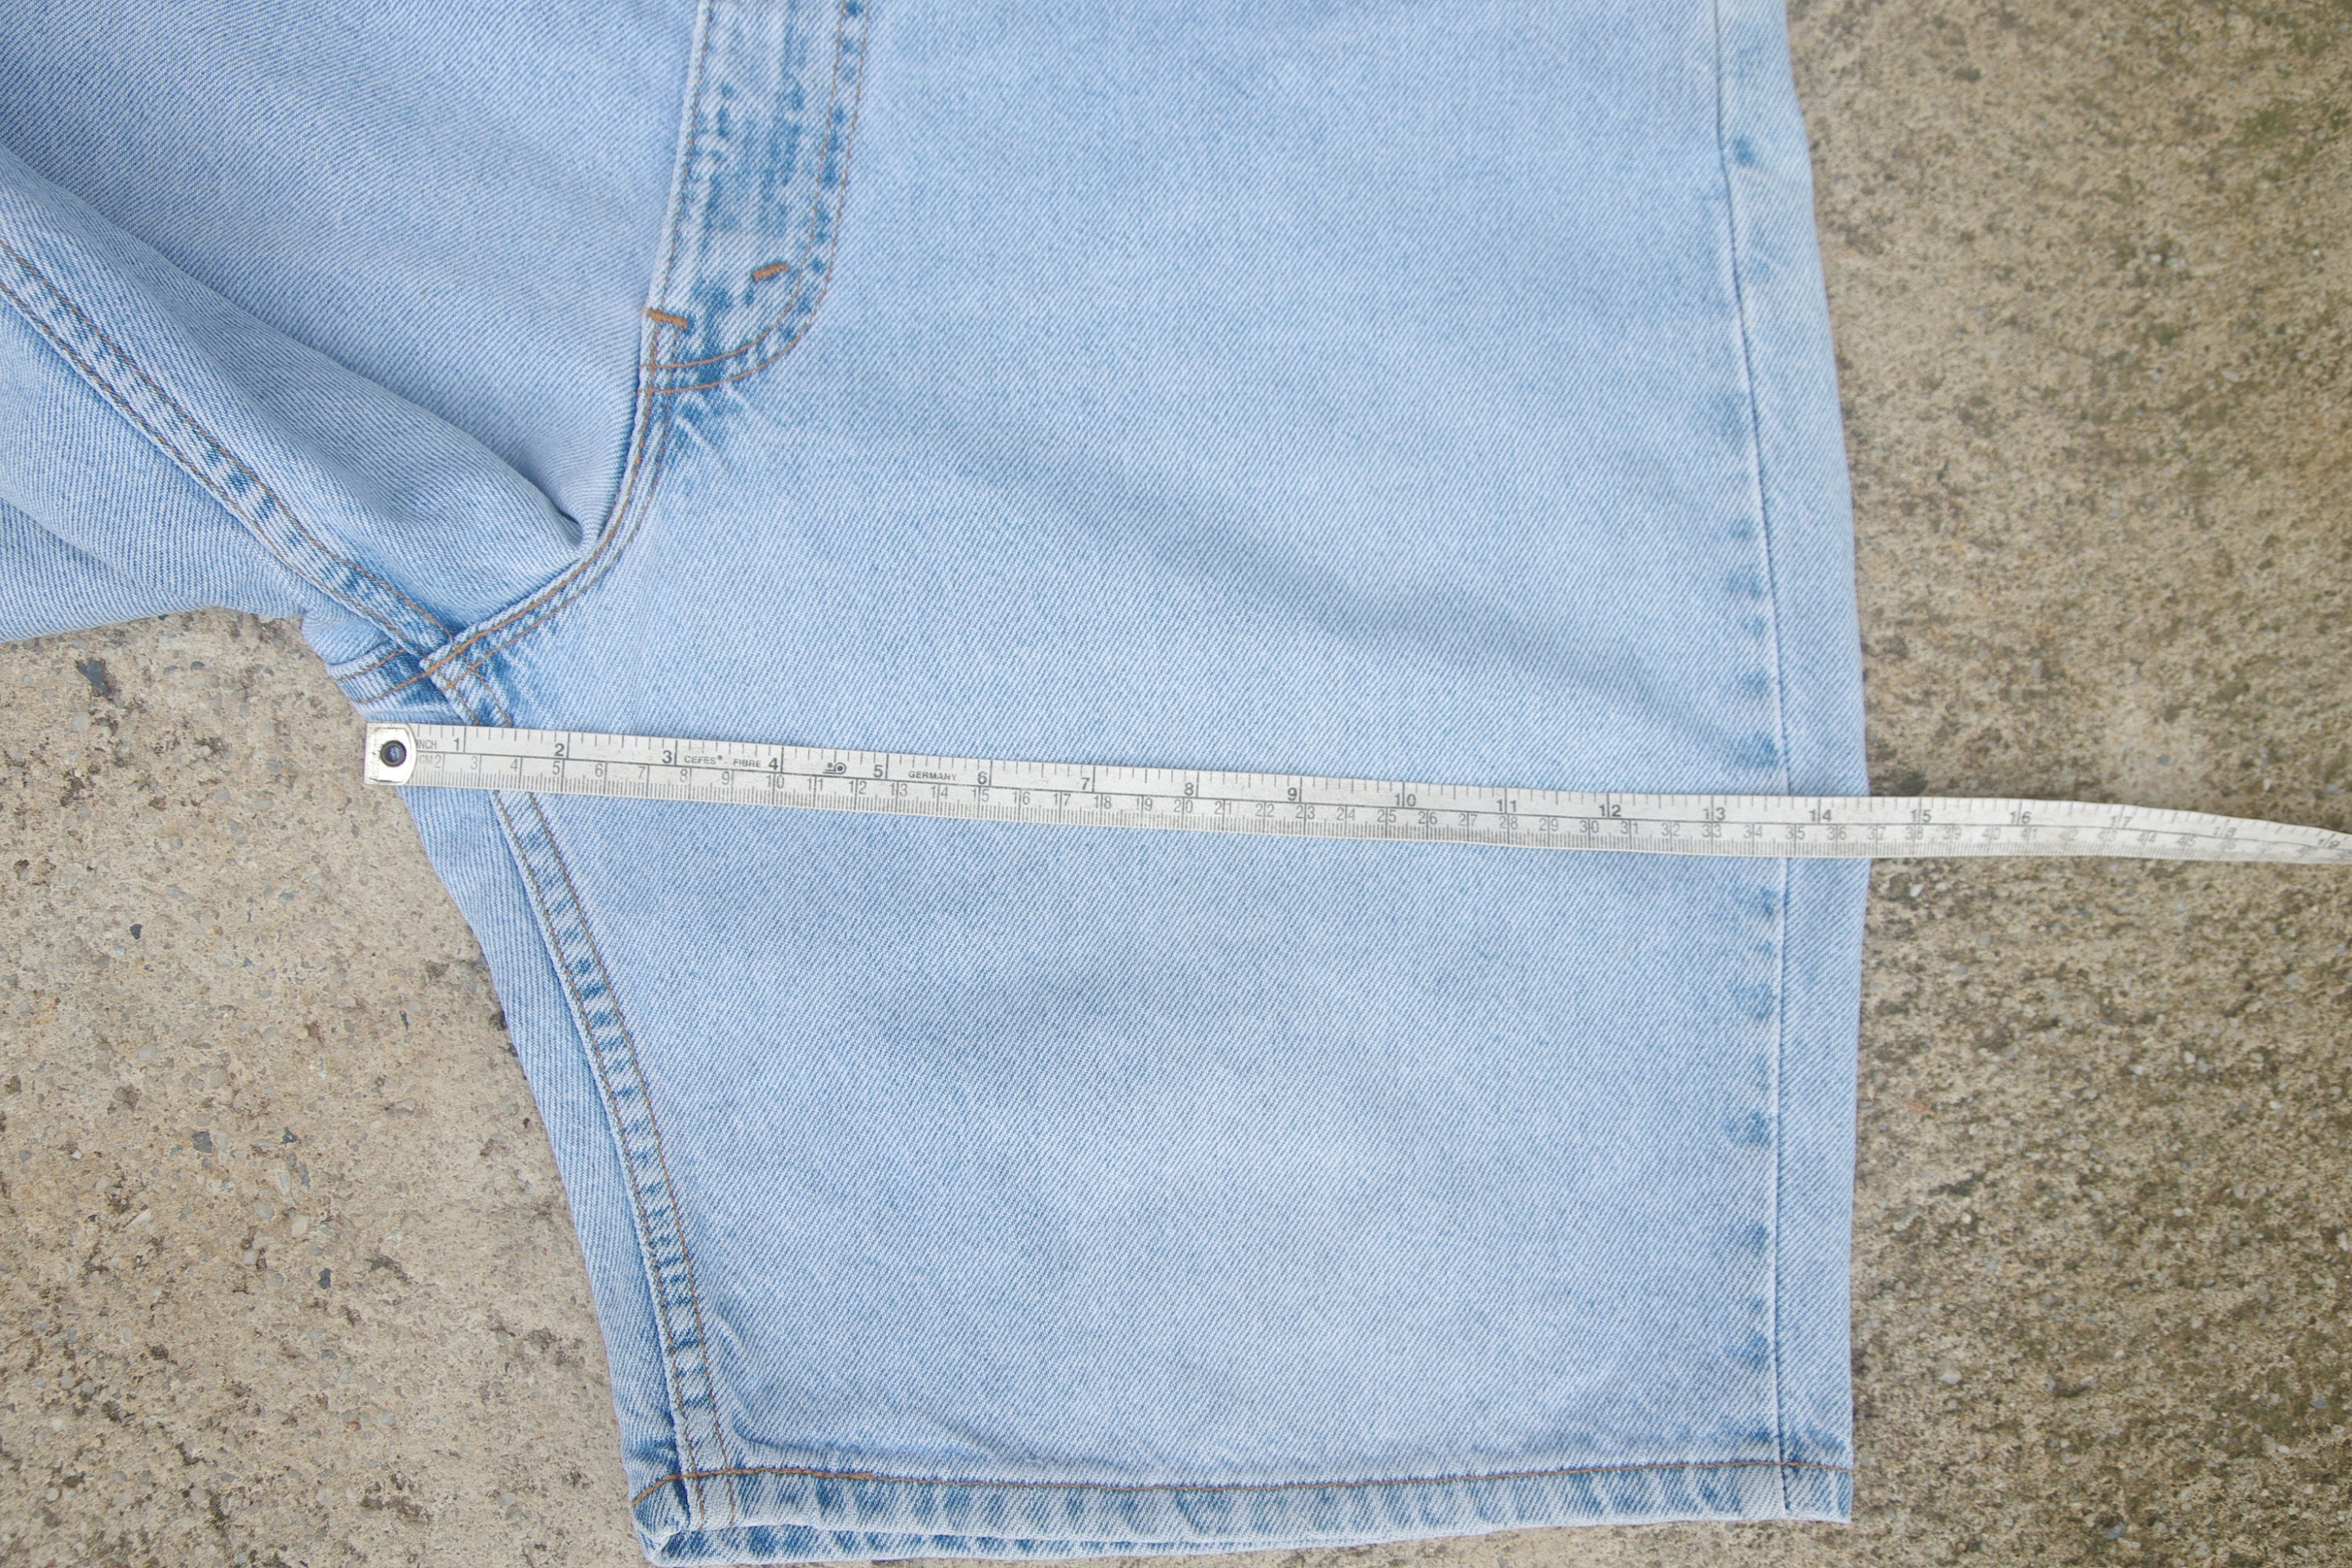 Faded Jeans Vintage Levis Shorts 550 W35 W36,levis White Tab,beautiful ...